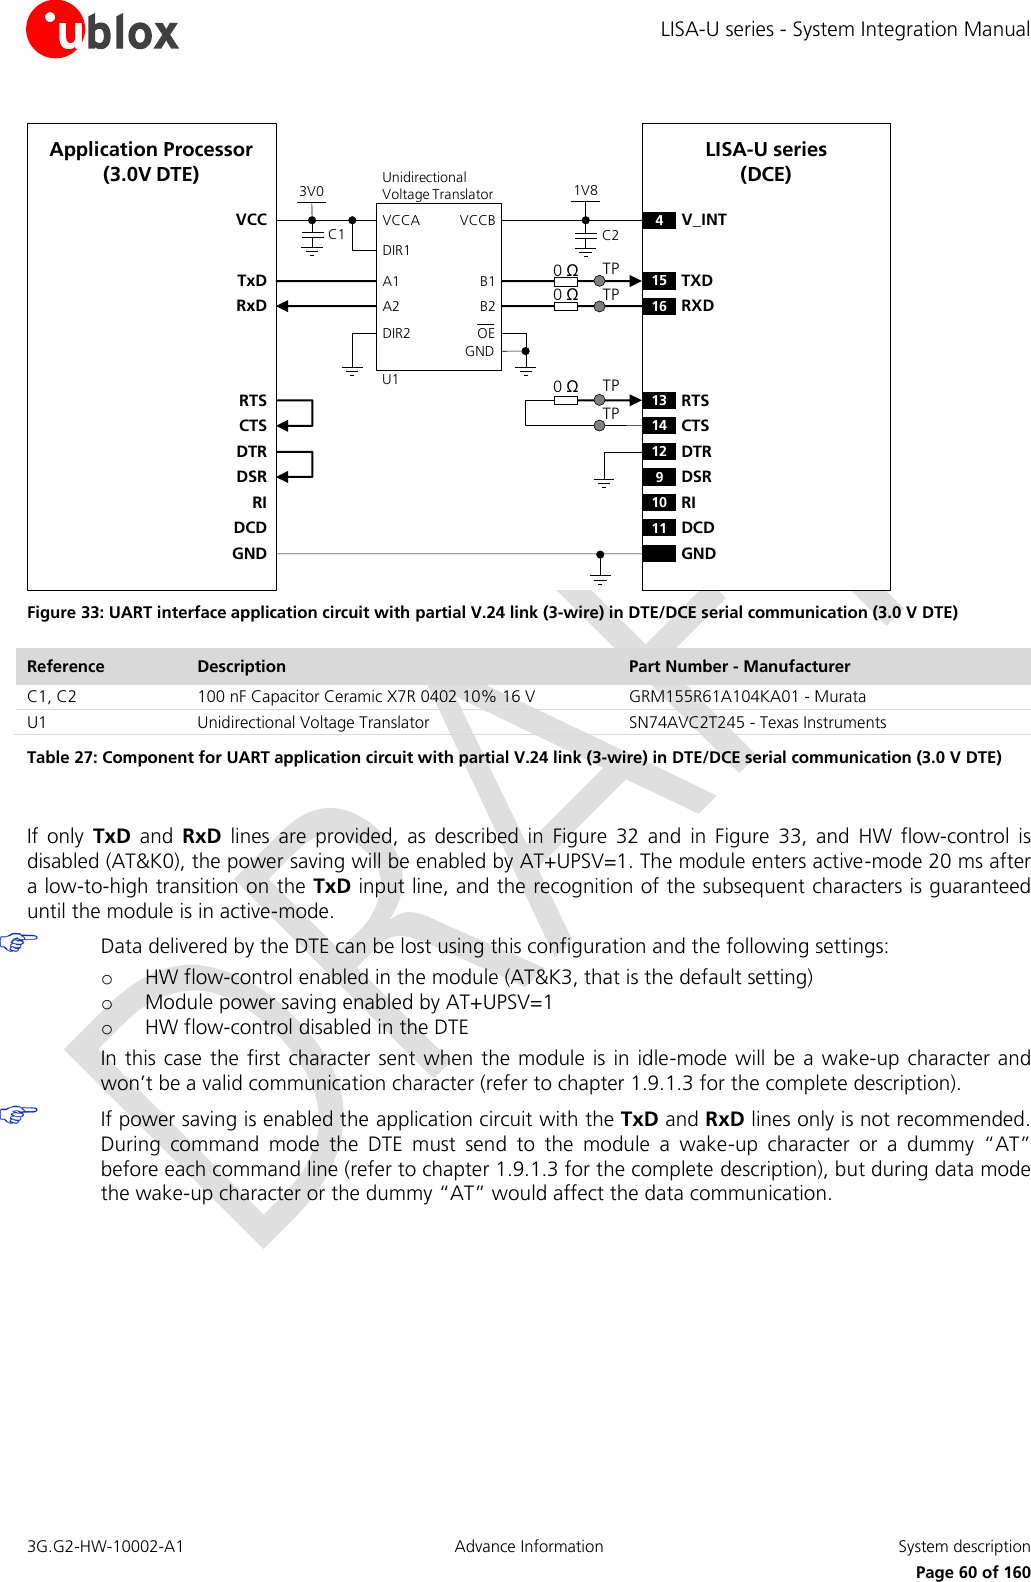 LISA-U series - System Integration Manual 3G.G2-HW-10002-A1  Advance Information  System description      Page 60 of 160 4V_INTTxDApplication Processor(3.0V DTE)RxDDTRDSRRIDCDGNDLISA-U series (DCE)15 TXD12 DTR16 RXD9DSR10 RI11 DCDGND0 Ω0 ΩTPTP1V8B1 A1GNDU1VCCBVCCAUnidirectionalVoltage TranslatorC1 C23V0DIR1DIR2 OEVCCB2 A2RTSCTS13 RTS14 CTS0 ΩTPTP Figure 33: UART interface application circuit with partial V.24 link (3-wire) in DTE/DCE serial communication (3.0 V DTE) Reference Description Part Number - Manufacturer C1, C2 100 nF Capacitor Ceramic X7R 0402 10% 16 V GRM155R61A104KA01 - Murata U1 Unidirectional Voltage Translator SN74AVC2T245 - Texas Instruments Table 27: Component for UART application circuit with partial V.24 link (3-wire) in DTE/DCE serial communication (3.0 V DTE)  If  only  TxD  and  RxD  lines  are  provided,  as  described  in  Figure  32  and  in  Figure  33,  and  HW  flow-control  is disabled (AT&amp;K0), the power saving will be enabled by AT+UPSV=1. The module enters active-mode 20 ms after a low-to-high transition on the TxD input line, and the recognition of the subsequent characters is guaranteed until the module is in active-mode.  Data delivered by the DTE can be lost using this configuration and the following settings: o HW flow-control enabled in the module (AT&amp;K3, that is the default setting) o Module power saving enabled by AT+UPSV=1 o HW flow-control disabled in the DTE In this case the first character sent when the module is  in idle-mode  will be a wake-up  character and won’t be a valid communication character (refer to chapter 1.9.1.3 for the complete description).  If power saving is enabled the application circuit with the TxD and RxD lines only is not recommended. During  command  mode  the  DTE  must  send  to  the  module  a  wake-up  character  or  a  dummy  “AT” before each command line (refer to chapter 1.9.1.3 for the complete description), but during data mode the wake-up character or the dummy “AT” would affect the data communication.  